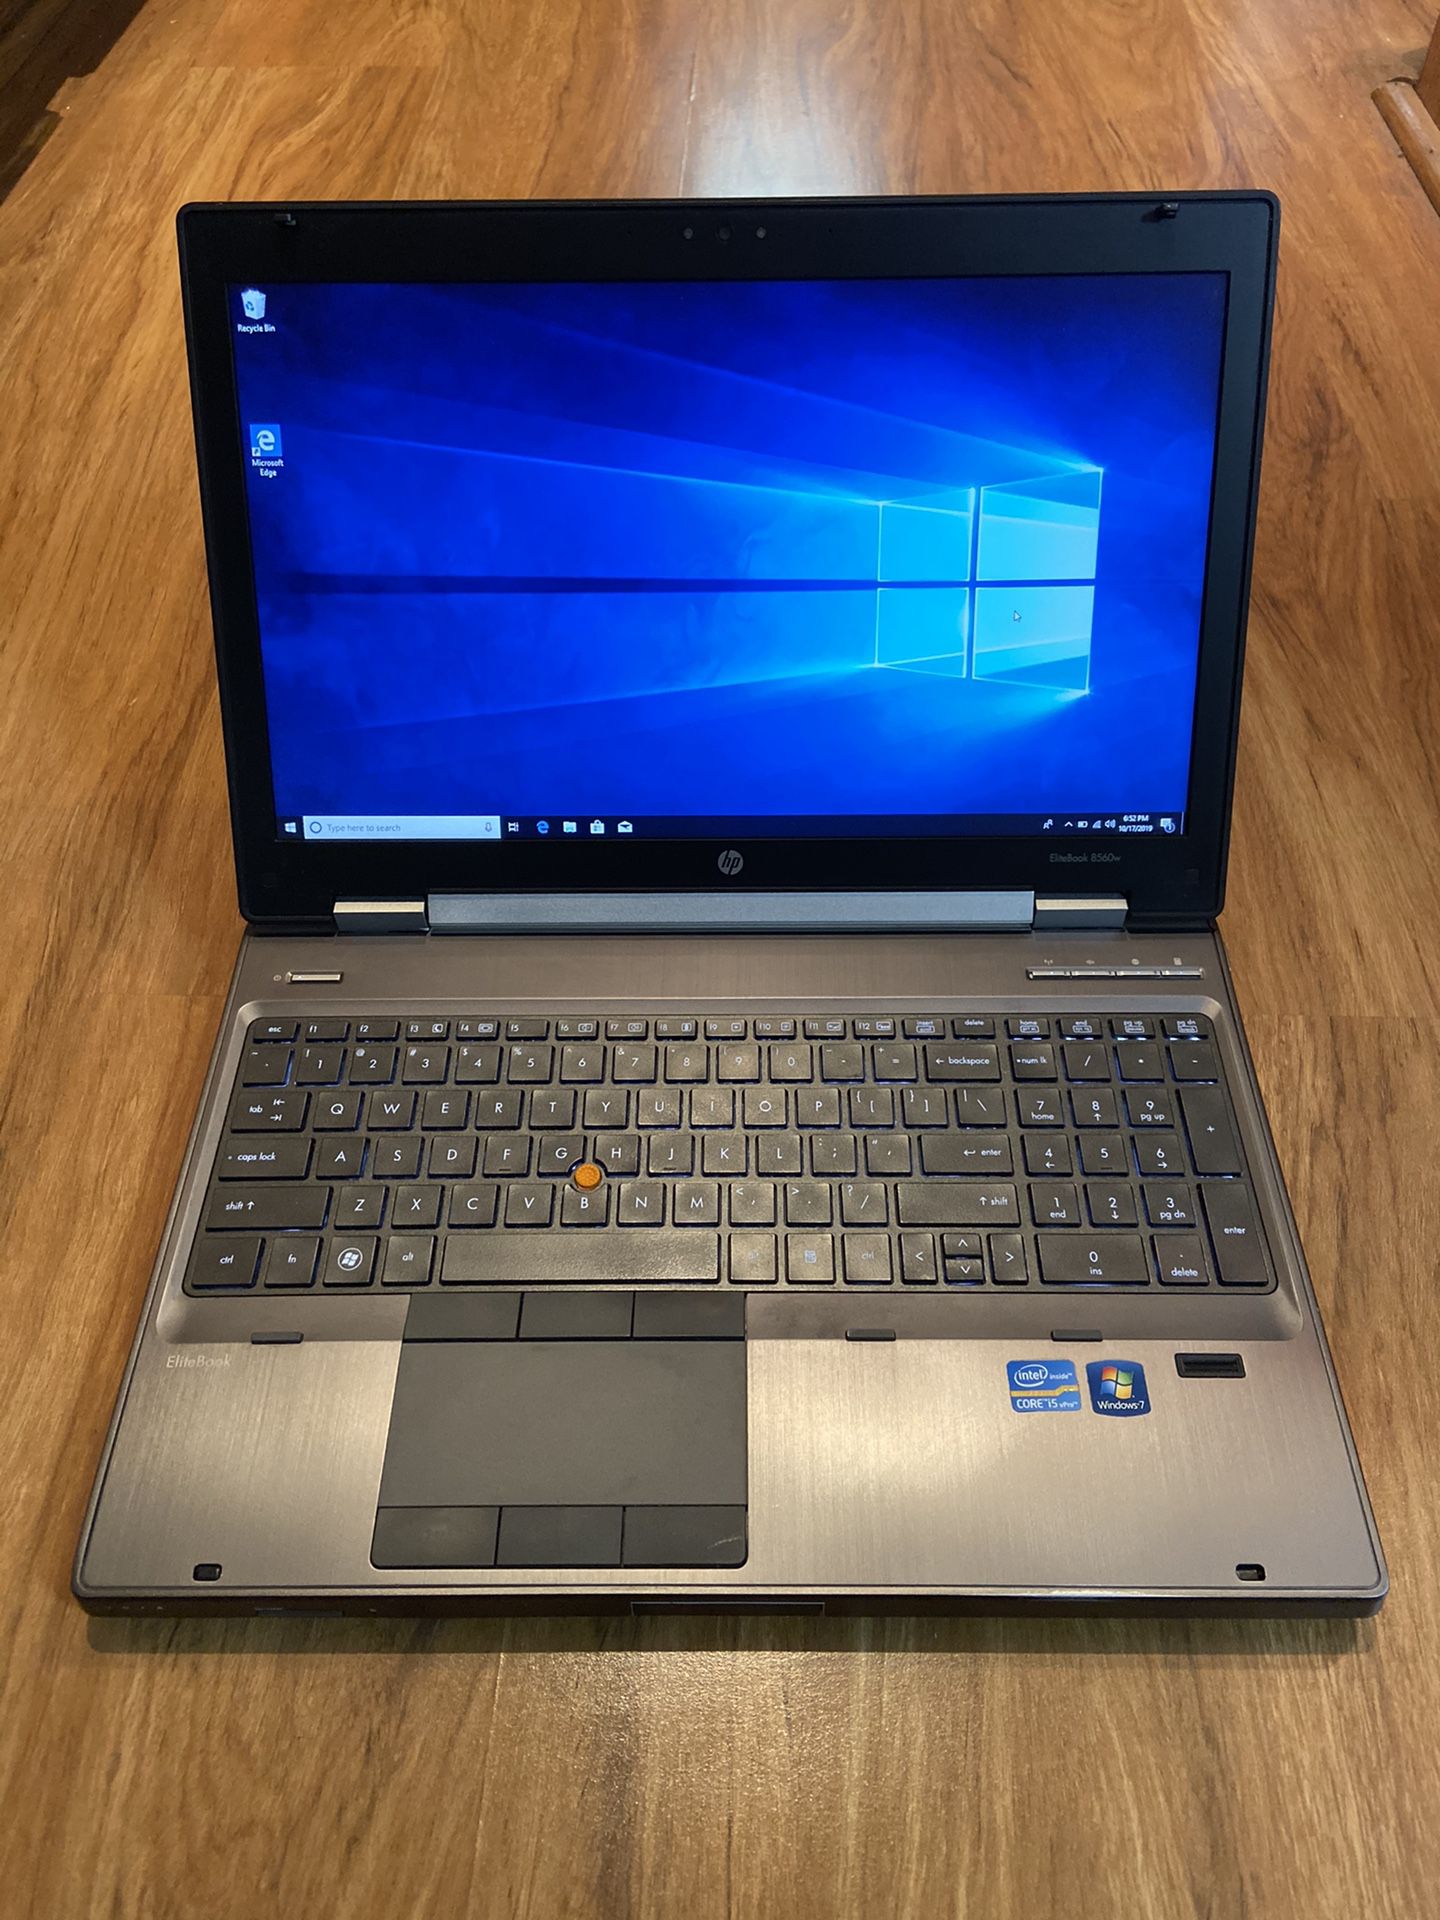 HP EliteBook 8560w Gaming Machine core i5-2540M 8GB Ram 500GB Hard Drive 15.6 inch Screen Windows 10 Pro Laptop with charger in Excellent Working con